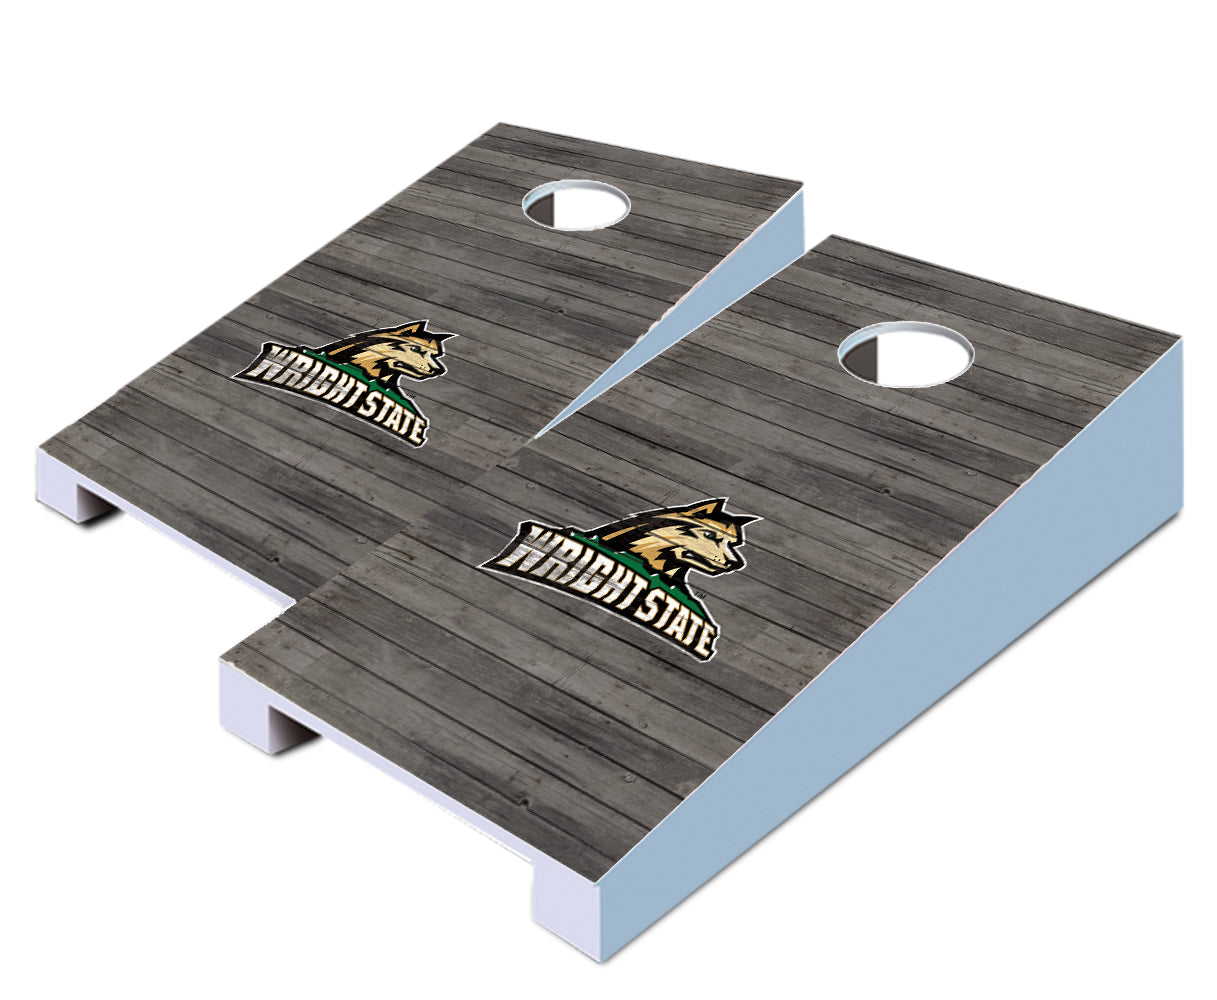 "Wright State Distressed" Tabletop Cornhole Boards